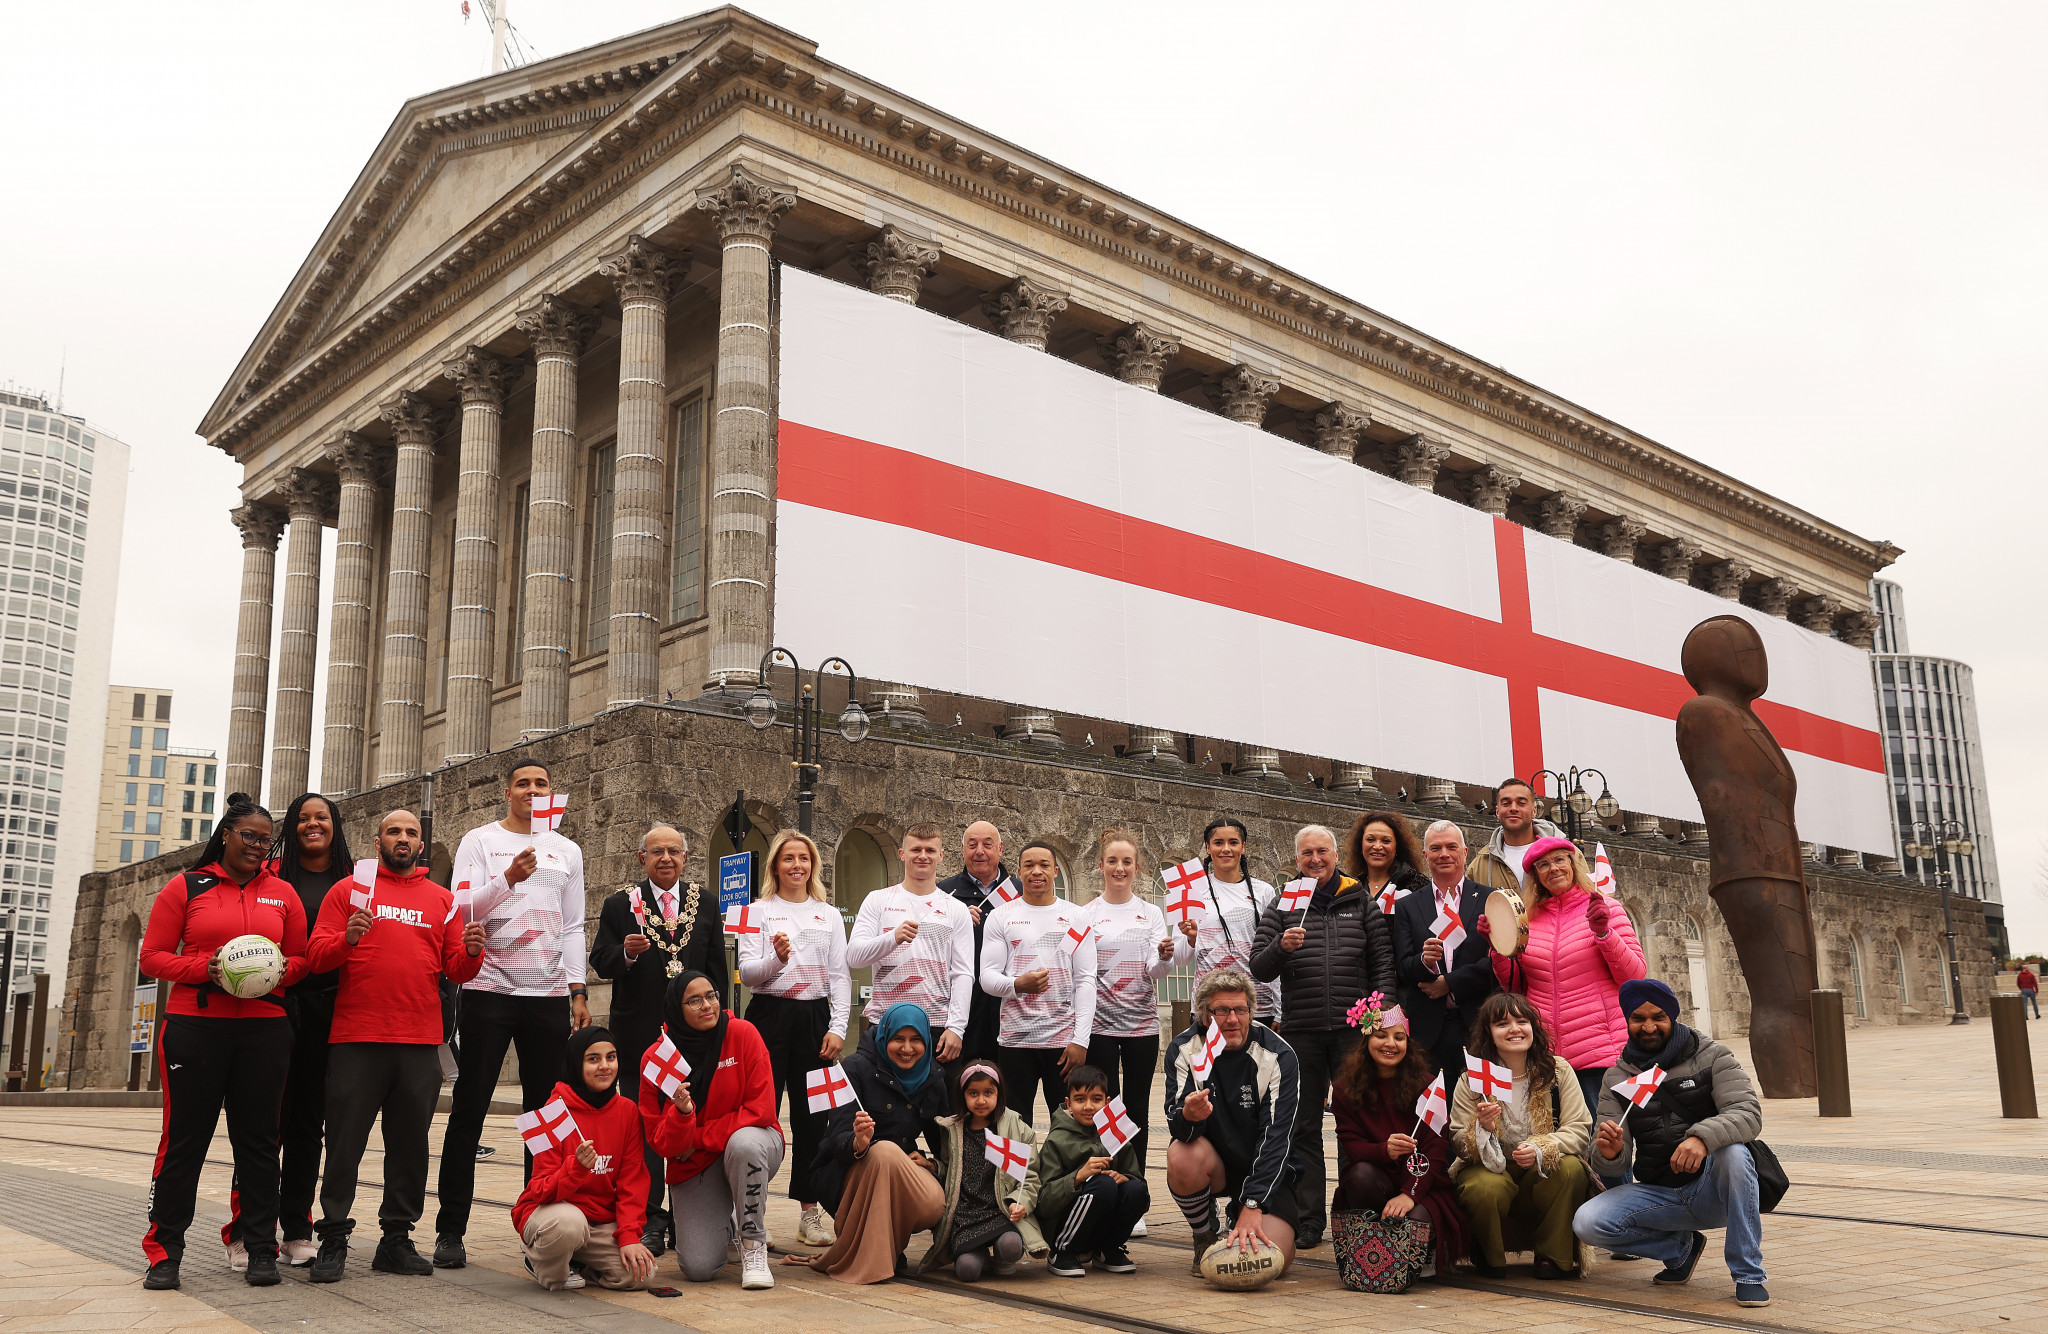 Athletes, Council members and community groups gathered outside the Birmingham Town Hall for the special celebration ©Birmingham City Council